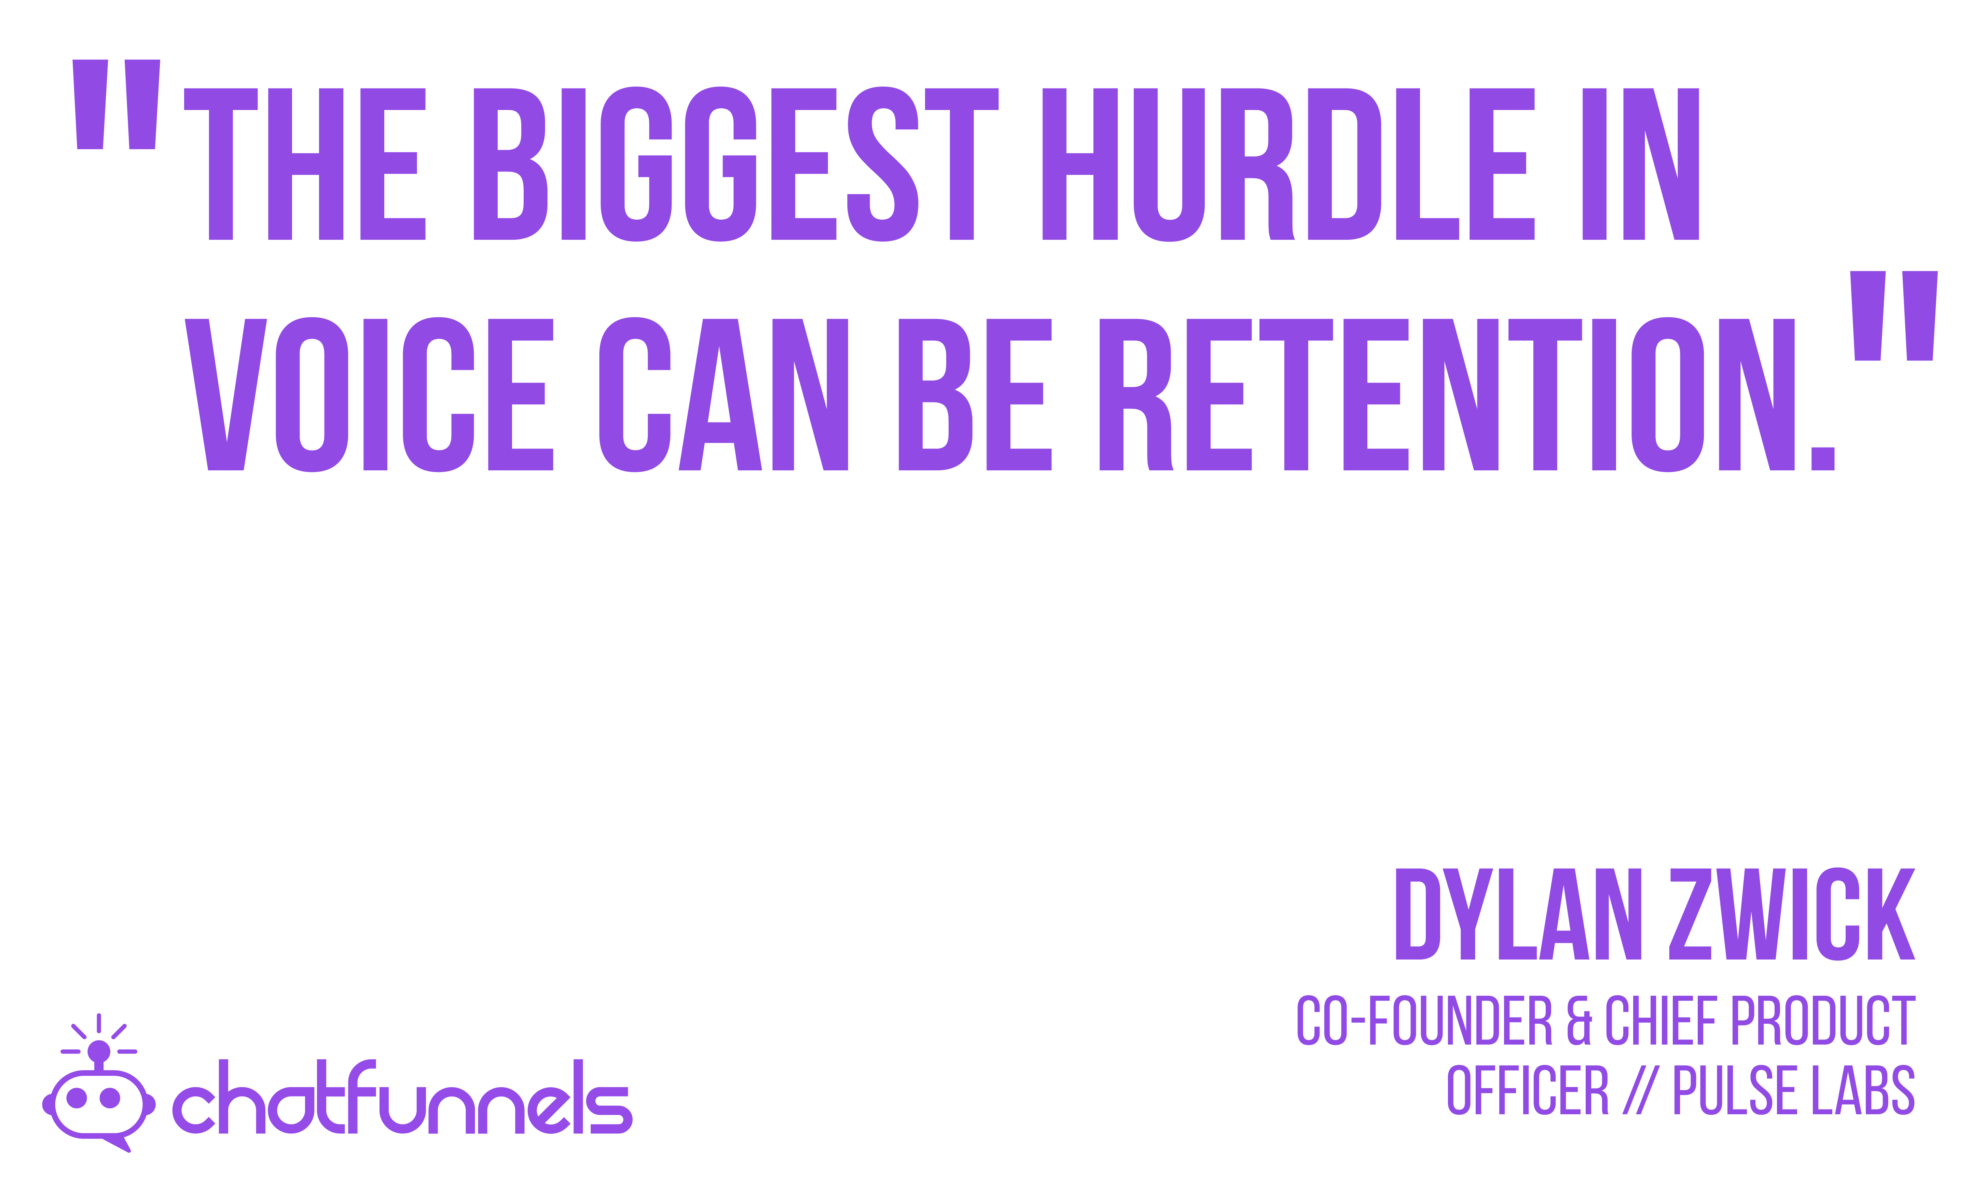 The biggest hurdle in voice can be retention